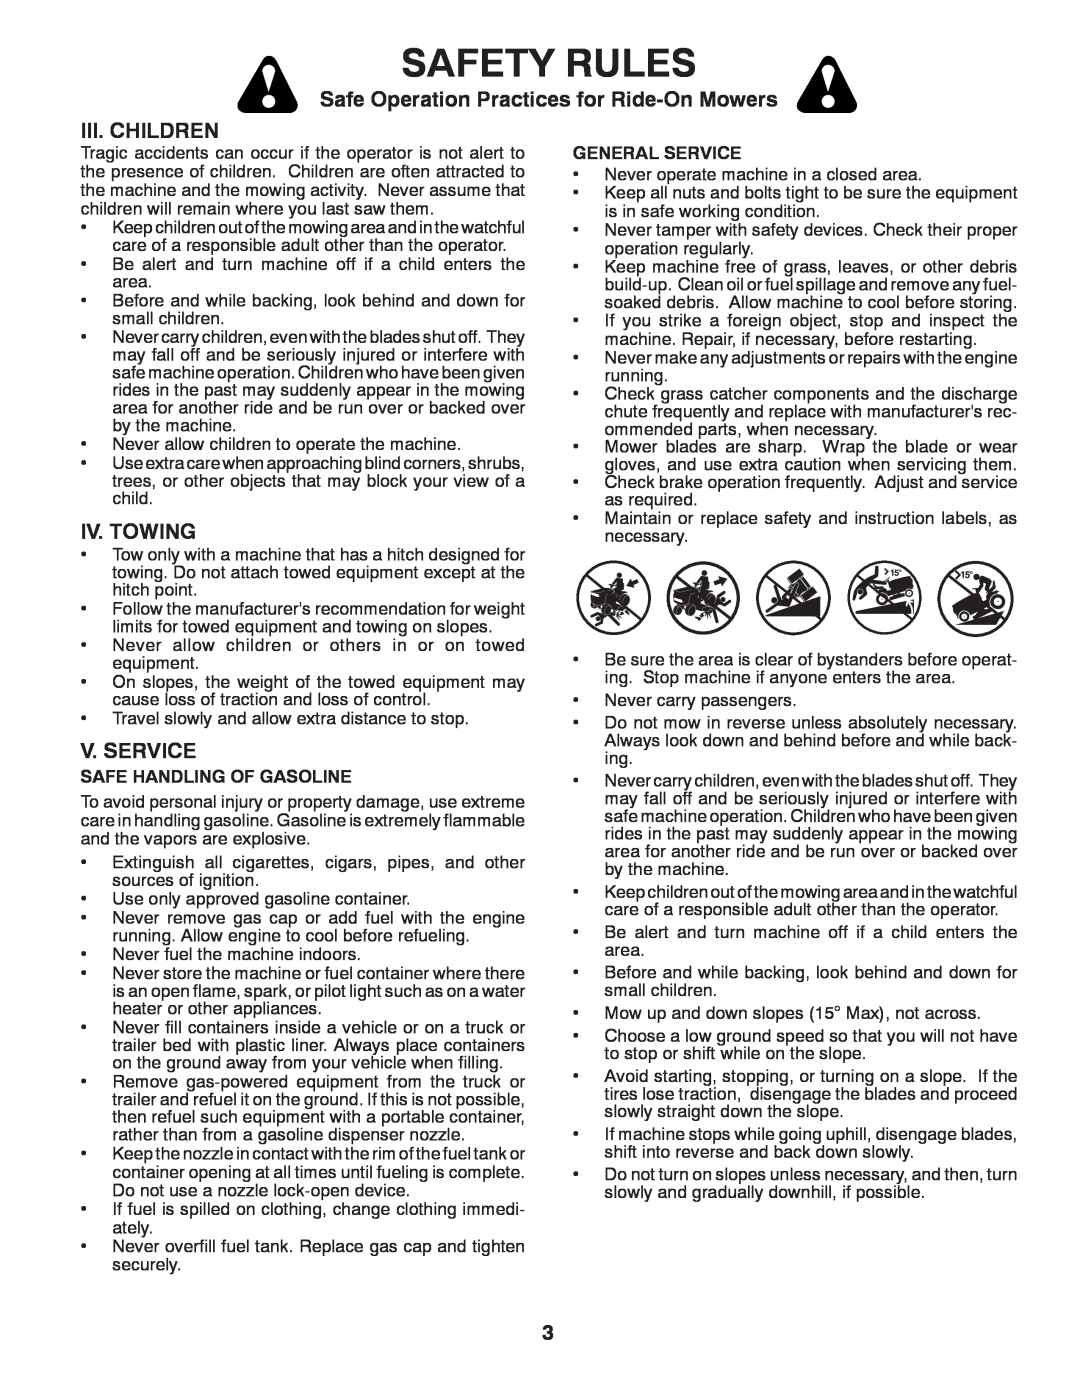 Husqvarna 917.240462 Iii. Children, Iv. Towing, V. Service, Safety Rules, Safe Operation Practices for Ride-OnMowers 